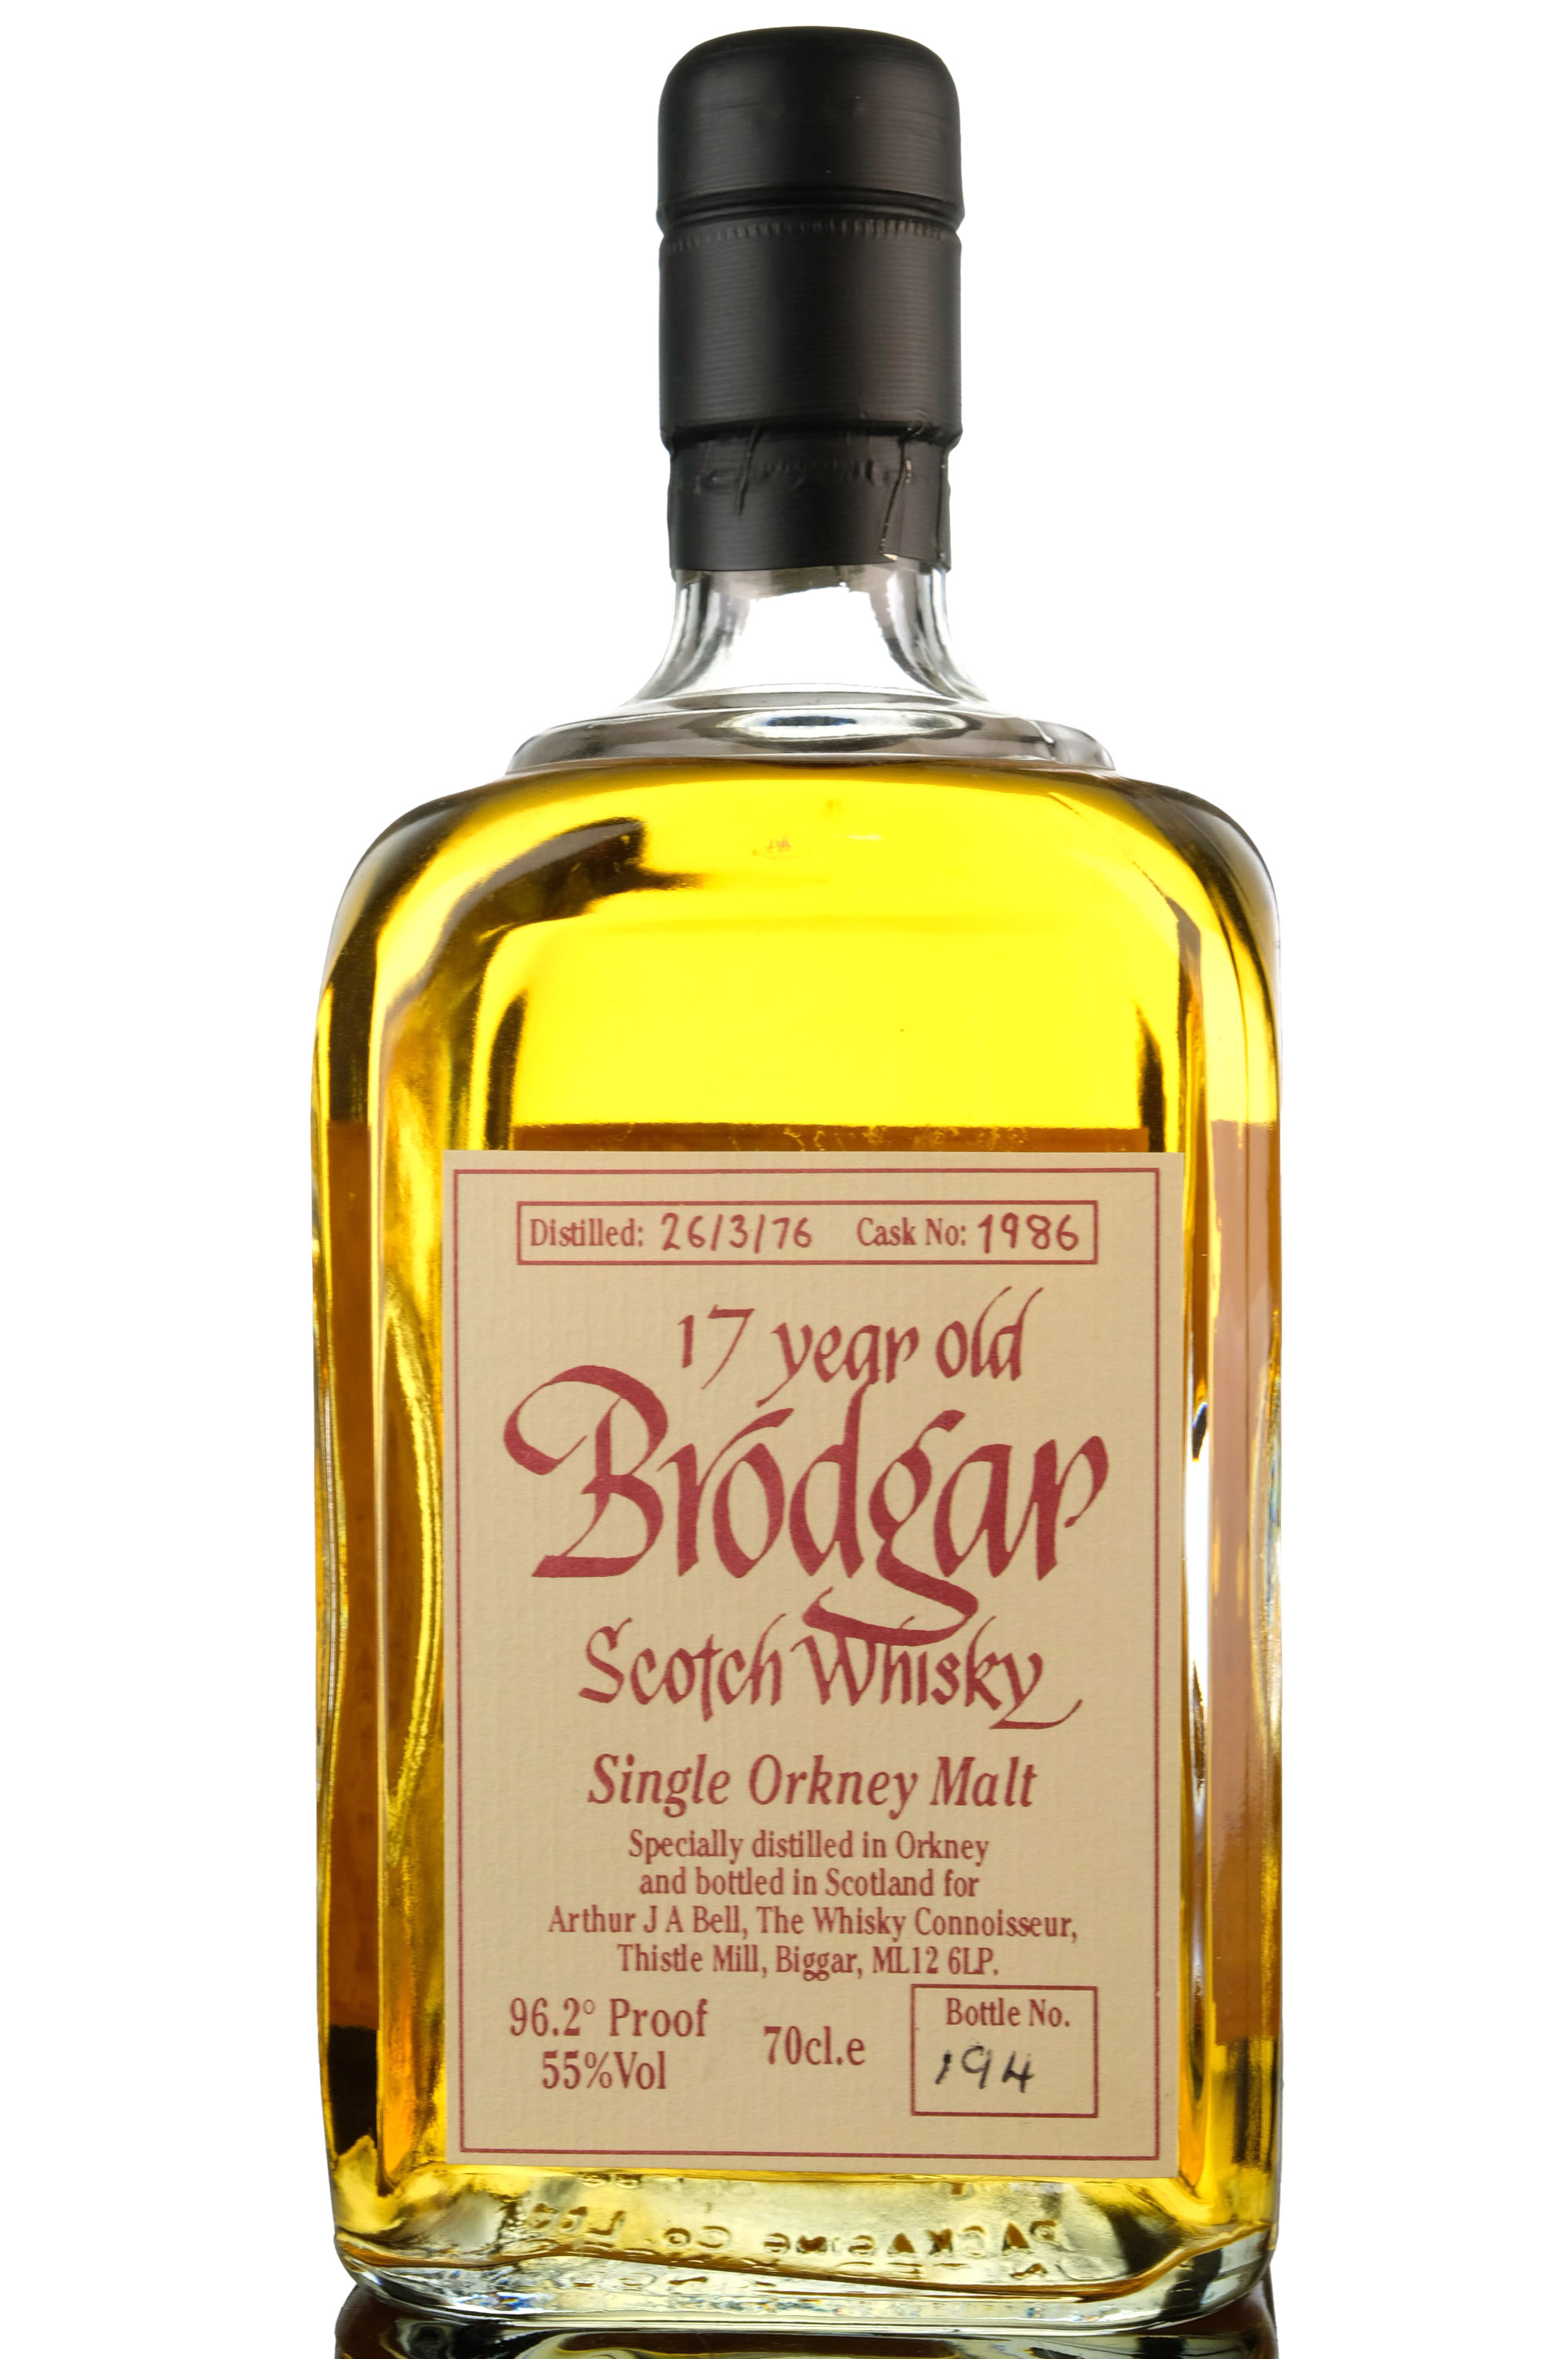 Brodgar (Highland Park) 1976 - 17 Year Old - The Whisky Connoisseur - Single Cask 1986